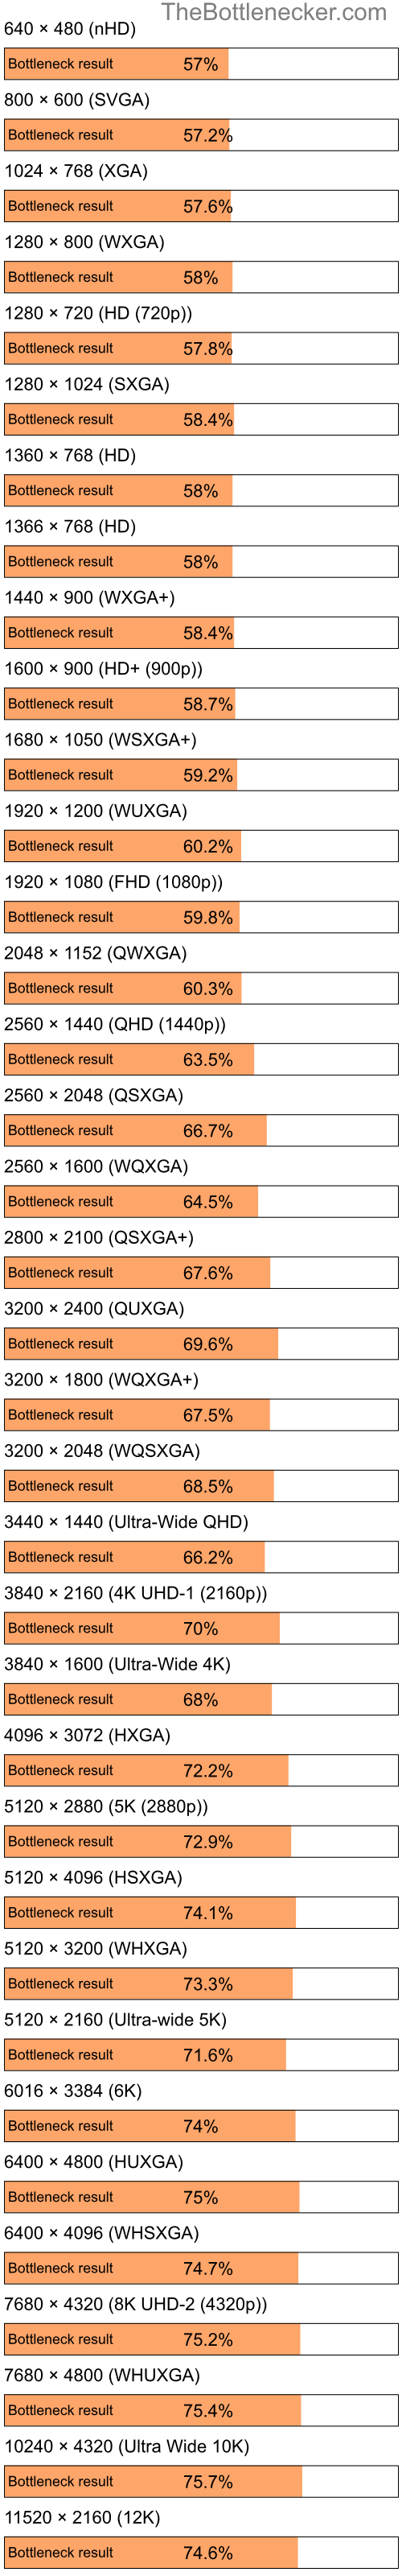 Bottleneck results by resolution for Intel Atom N270 and AMD Radeon X1300 PRO in Processor Intense Tasks